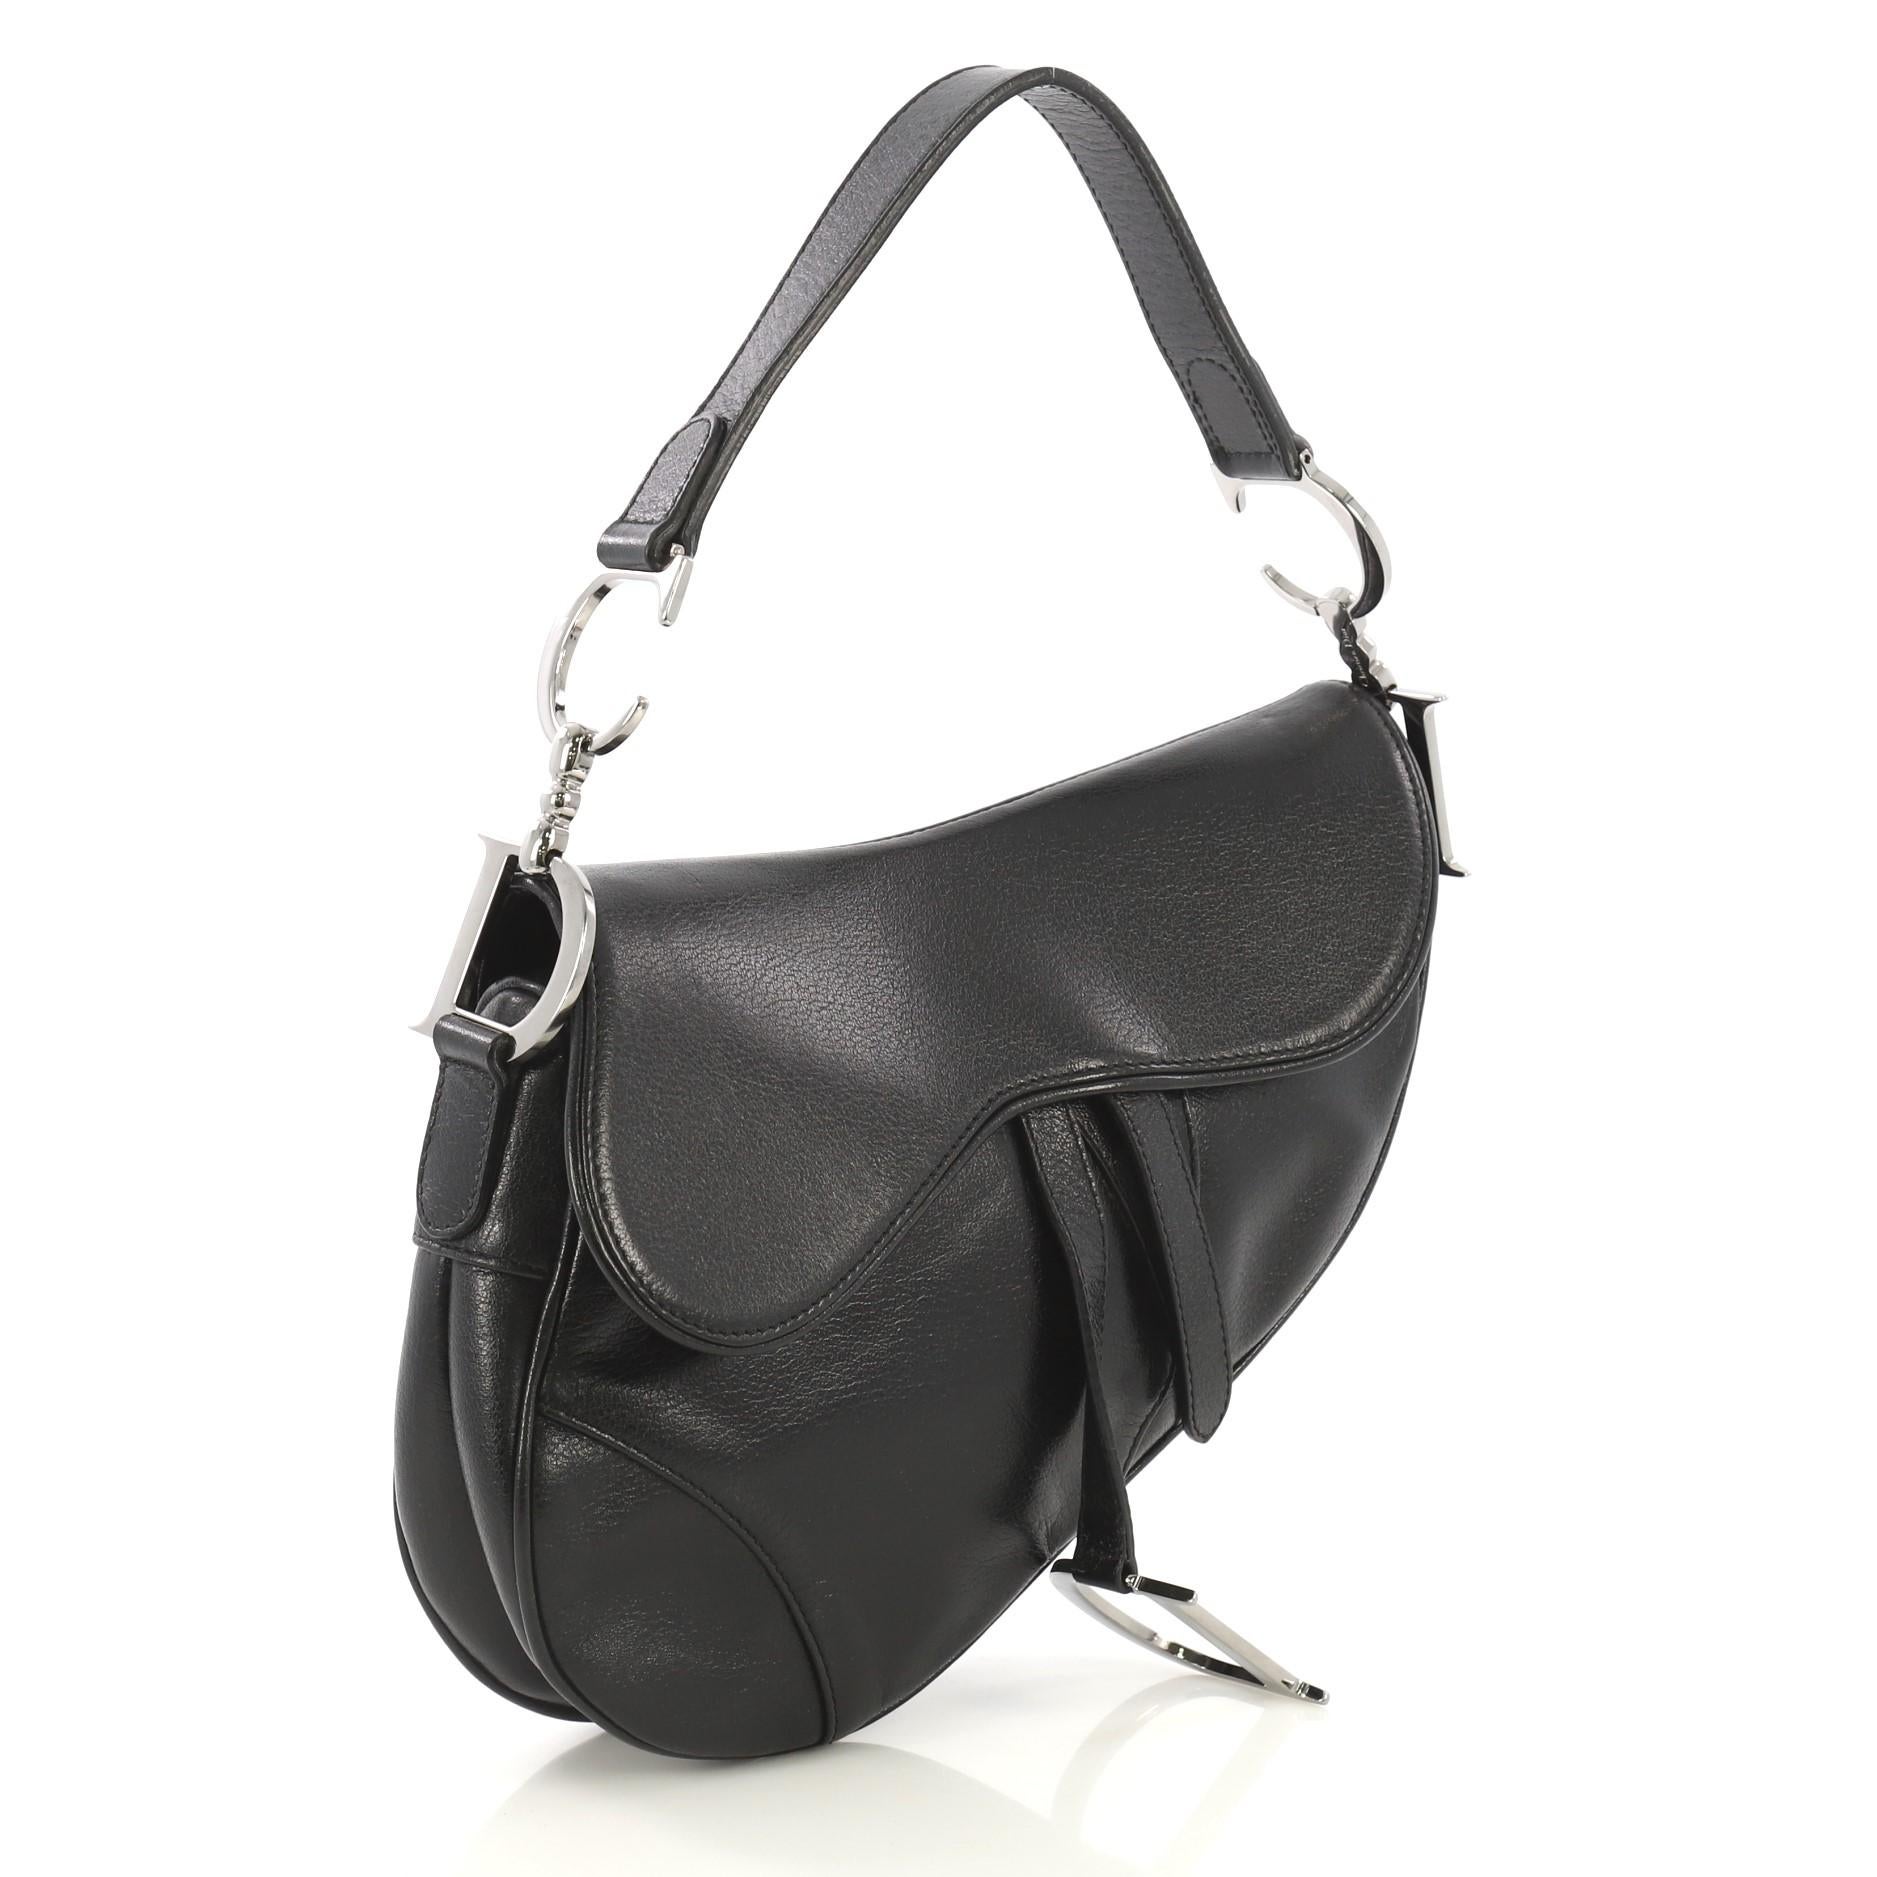 This Christian Dior Vintage Saddle Bag Leather Medium, crafted from black leather, features a top handle adorned with metal 'CD' finishing, saddle-shaped silhouette, and silver-tone hardware. Its fold over top opens to a black fabric interior with